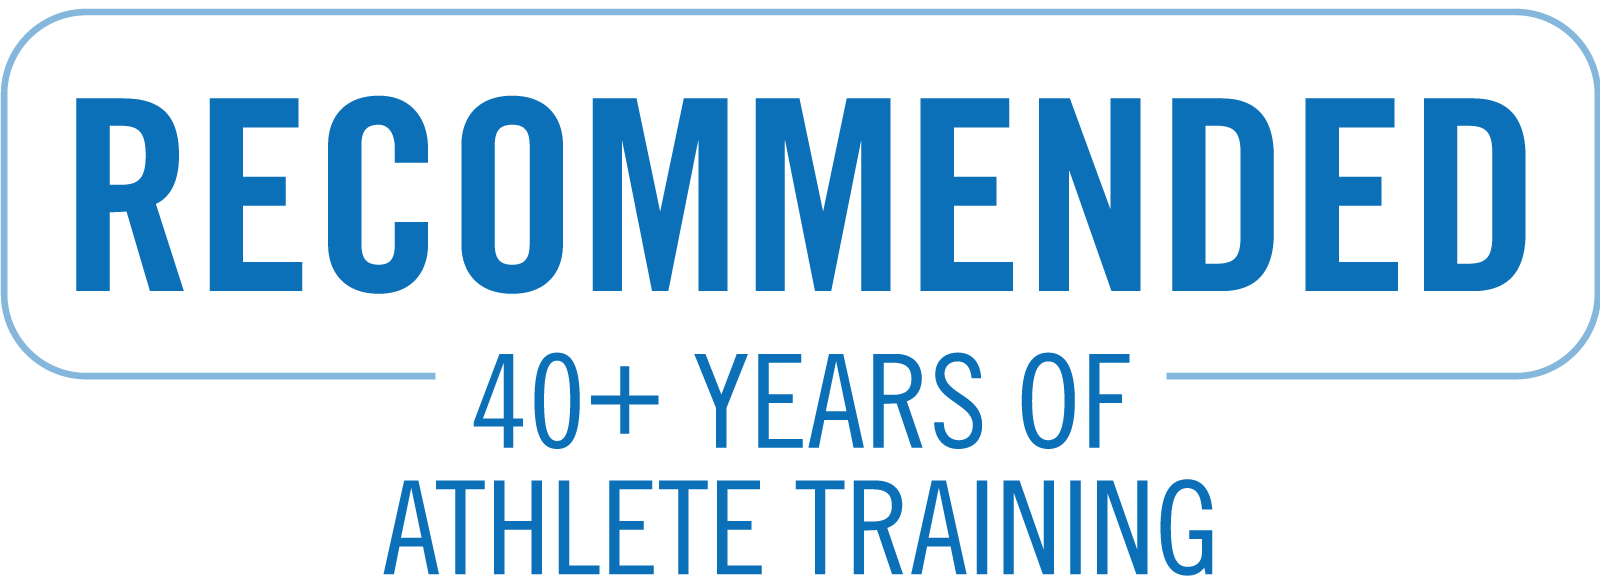 Sports Performance Camps Speed Camps Img Academy 2019